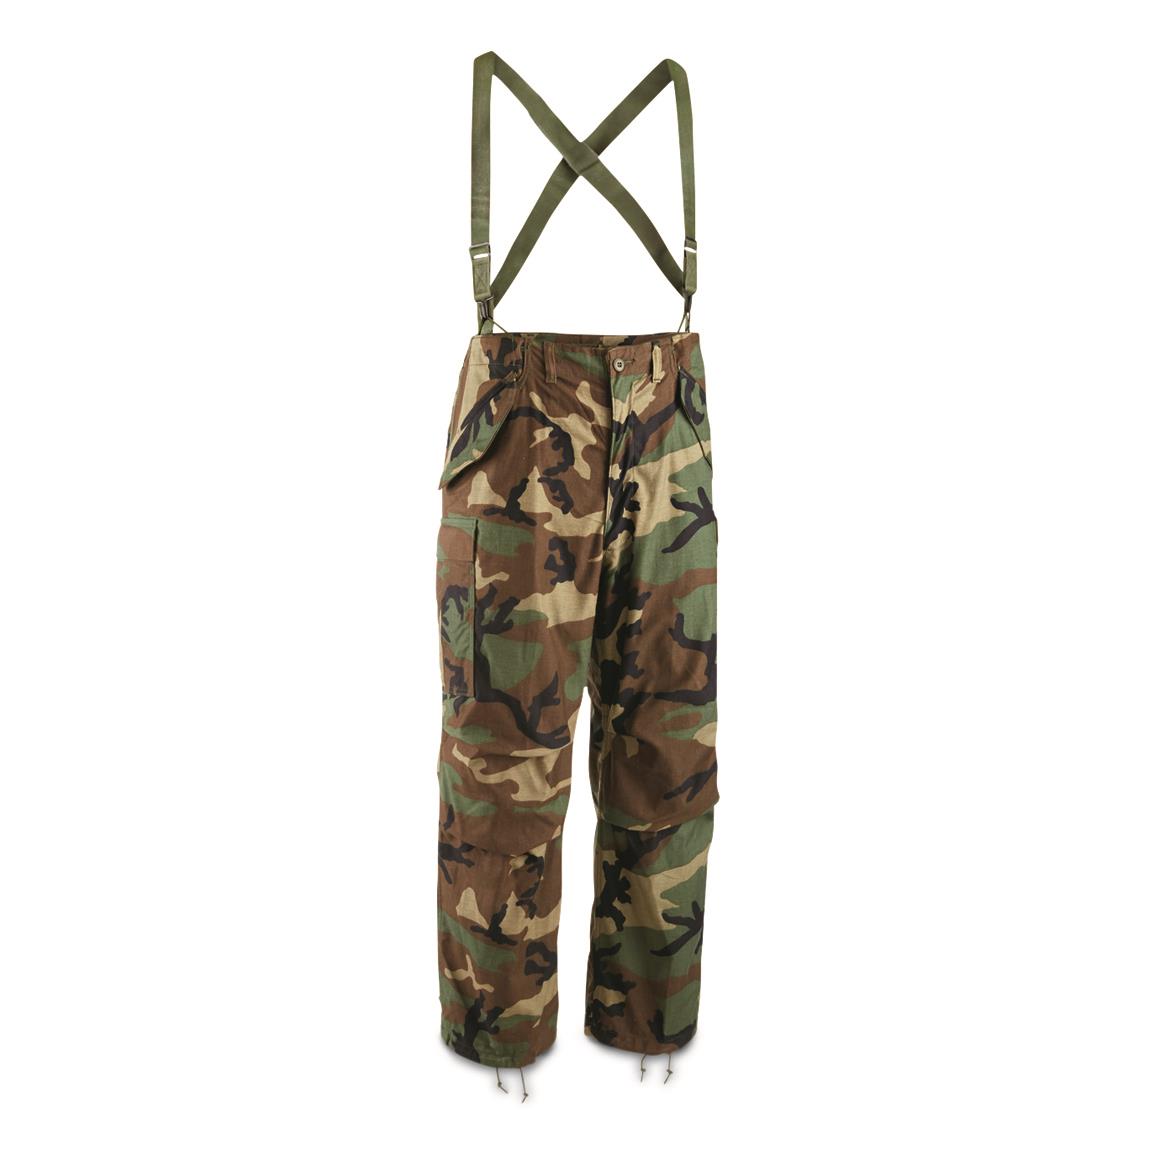 U.S. Military Surplus M65 Field Pants with Liner and Suspenders, New, Woodland